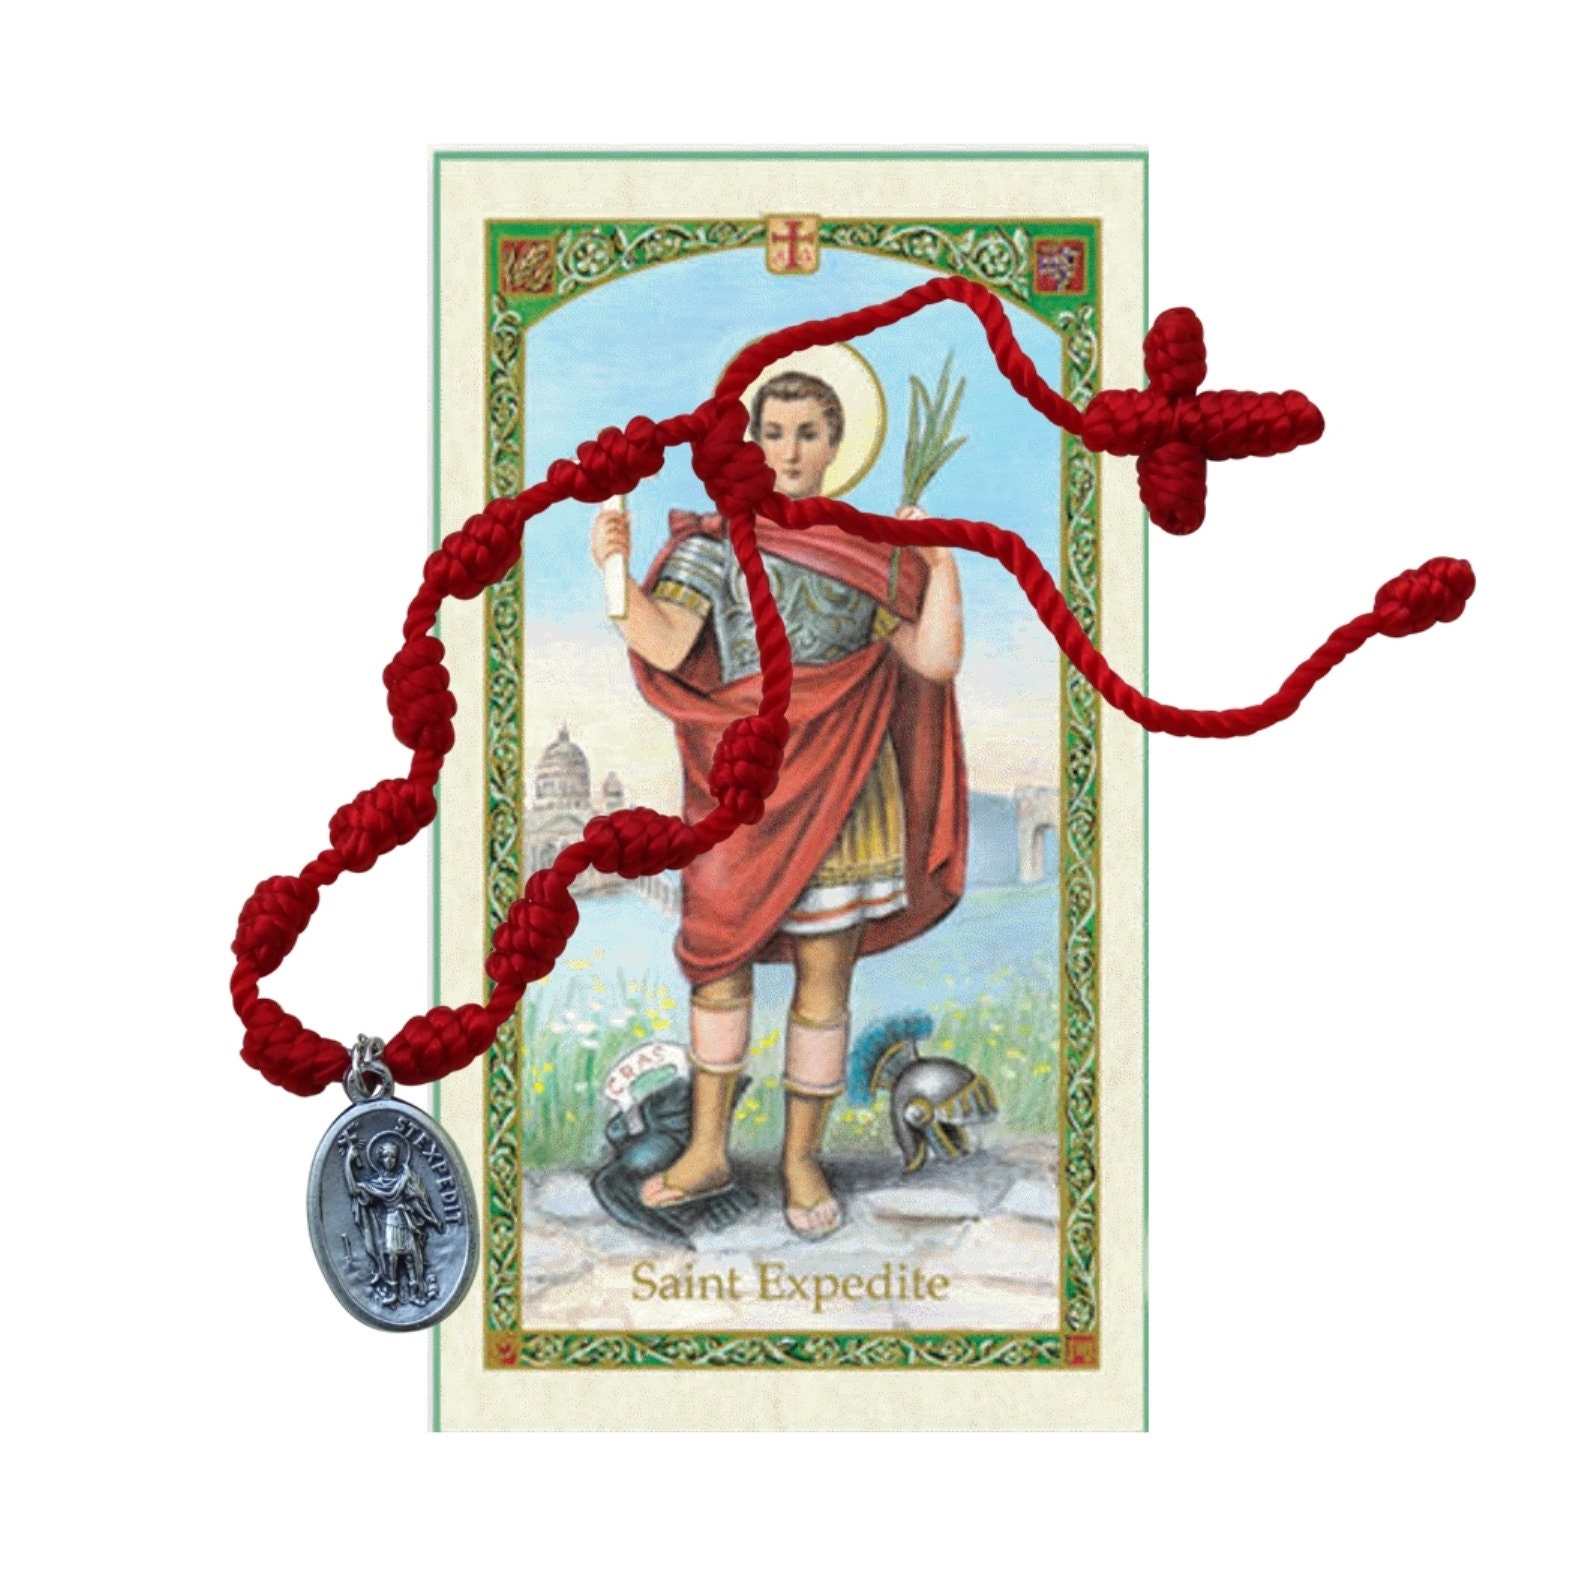 Saint Expedite Expeditus Expedito Pendant With Matching Prayer Card in  English or Espanol Patron Saint of Emergencies Situations 